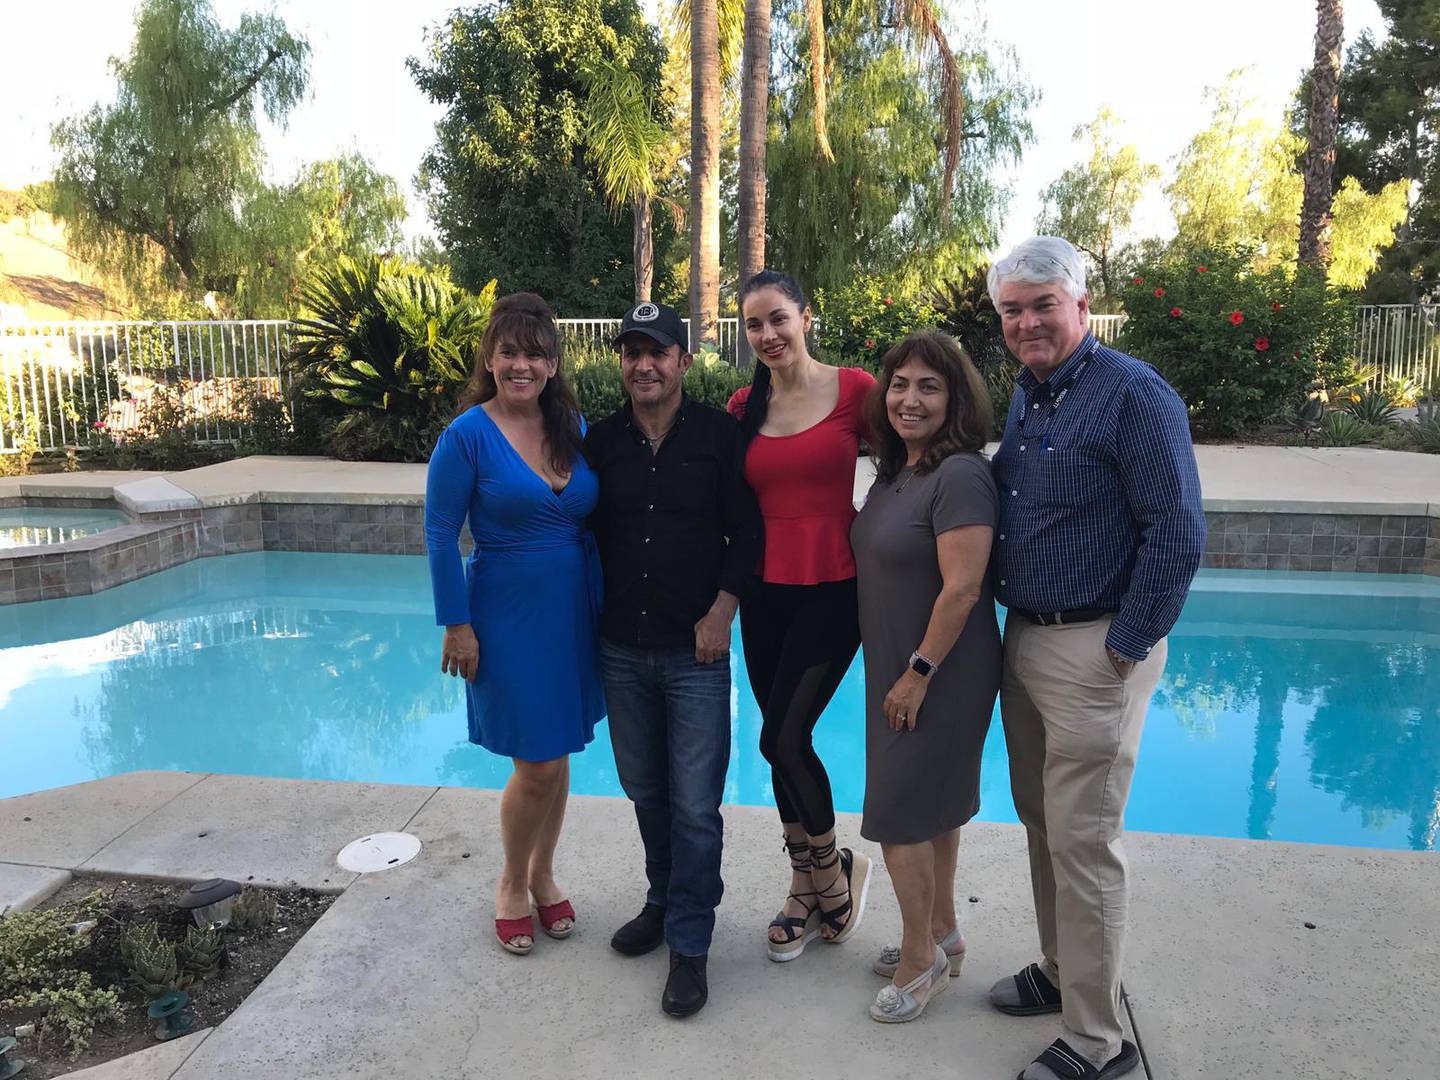 Destito, Sarikaya, actress Fanny Torres, and the Turkish couple who owned the California house used for pick-up shots. Erik Spurgin